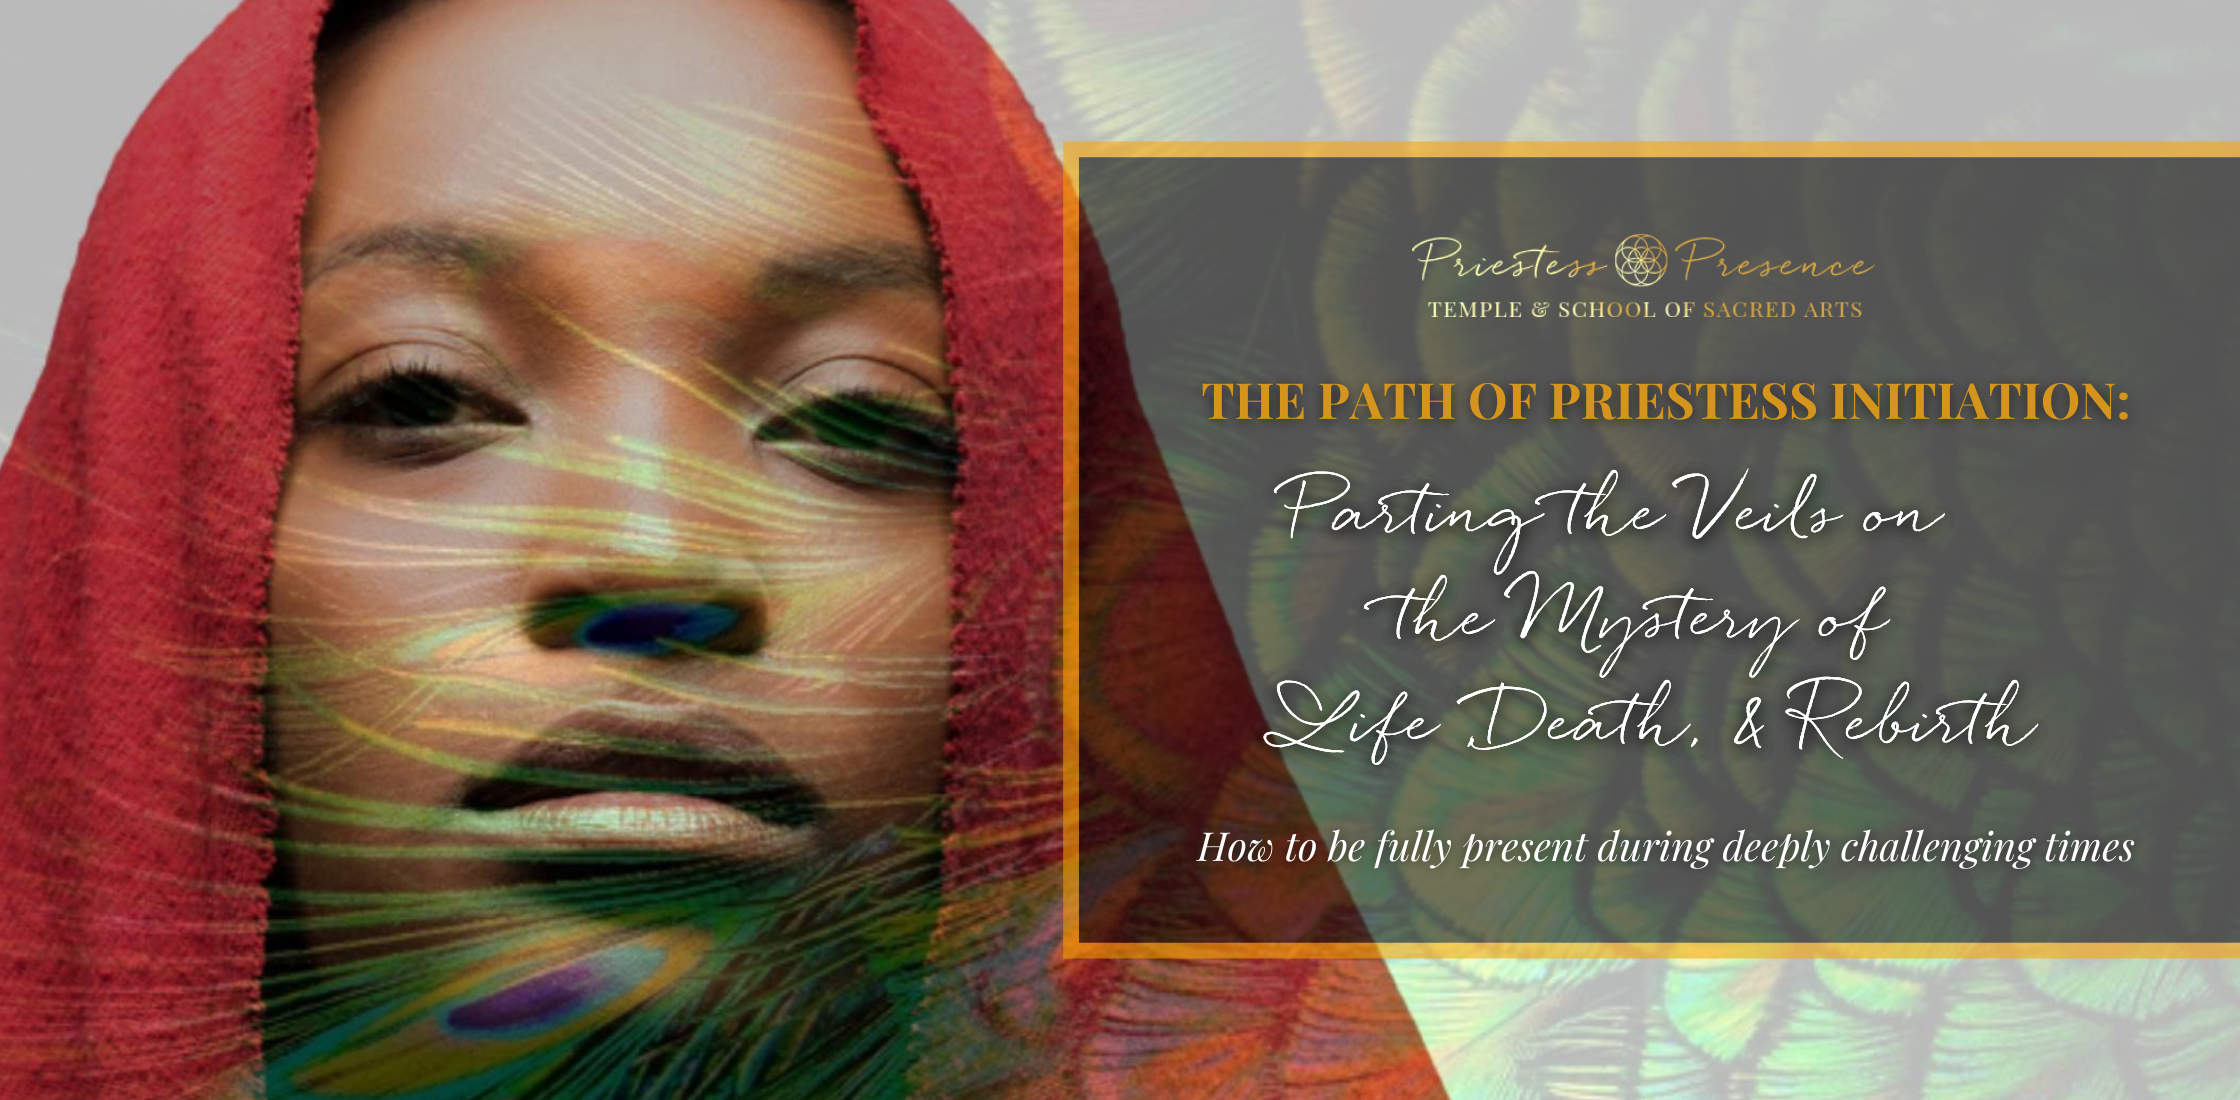  The Way of the Priestess: A Reclamation of Feminine